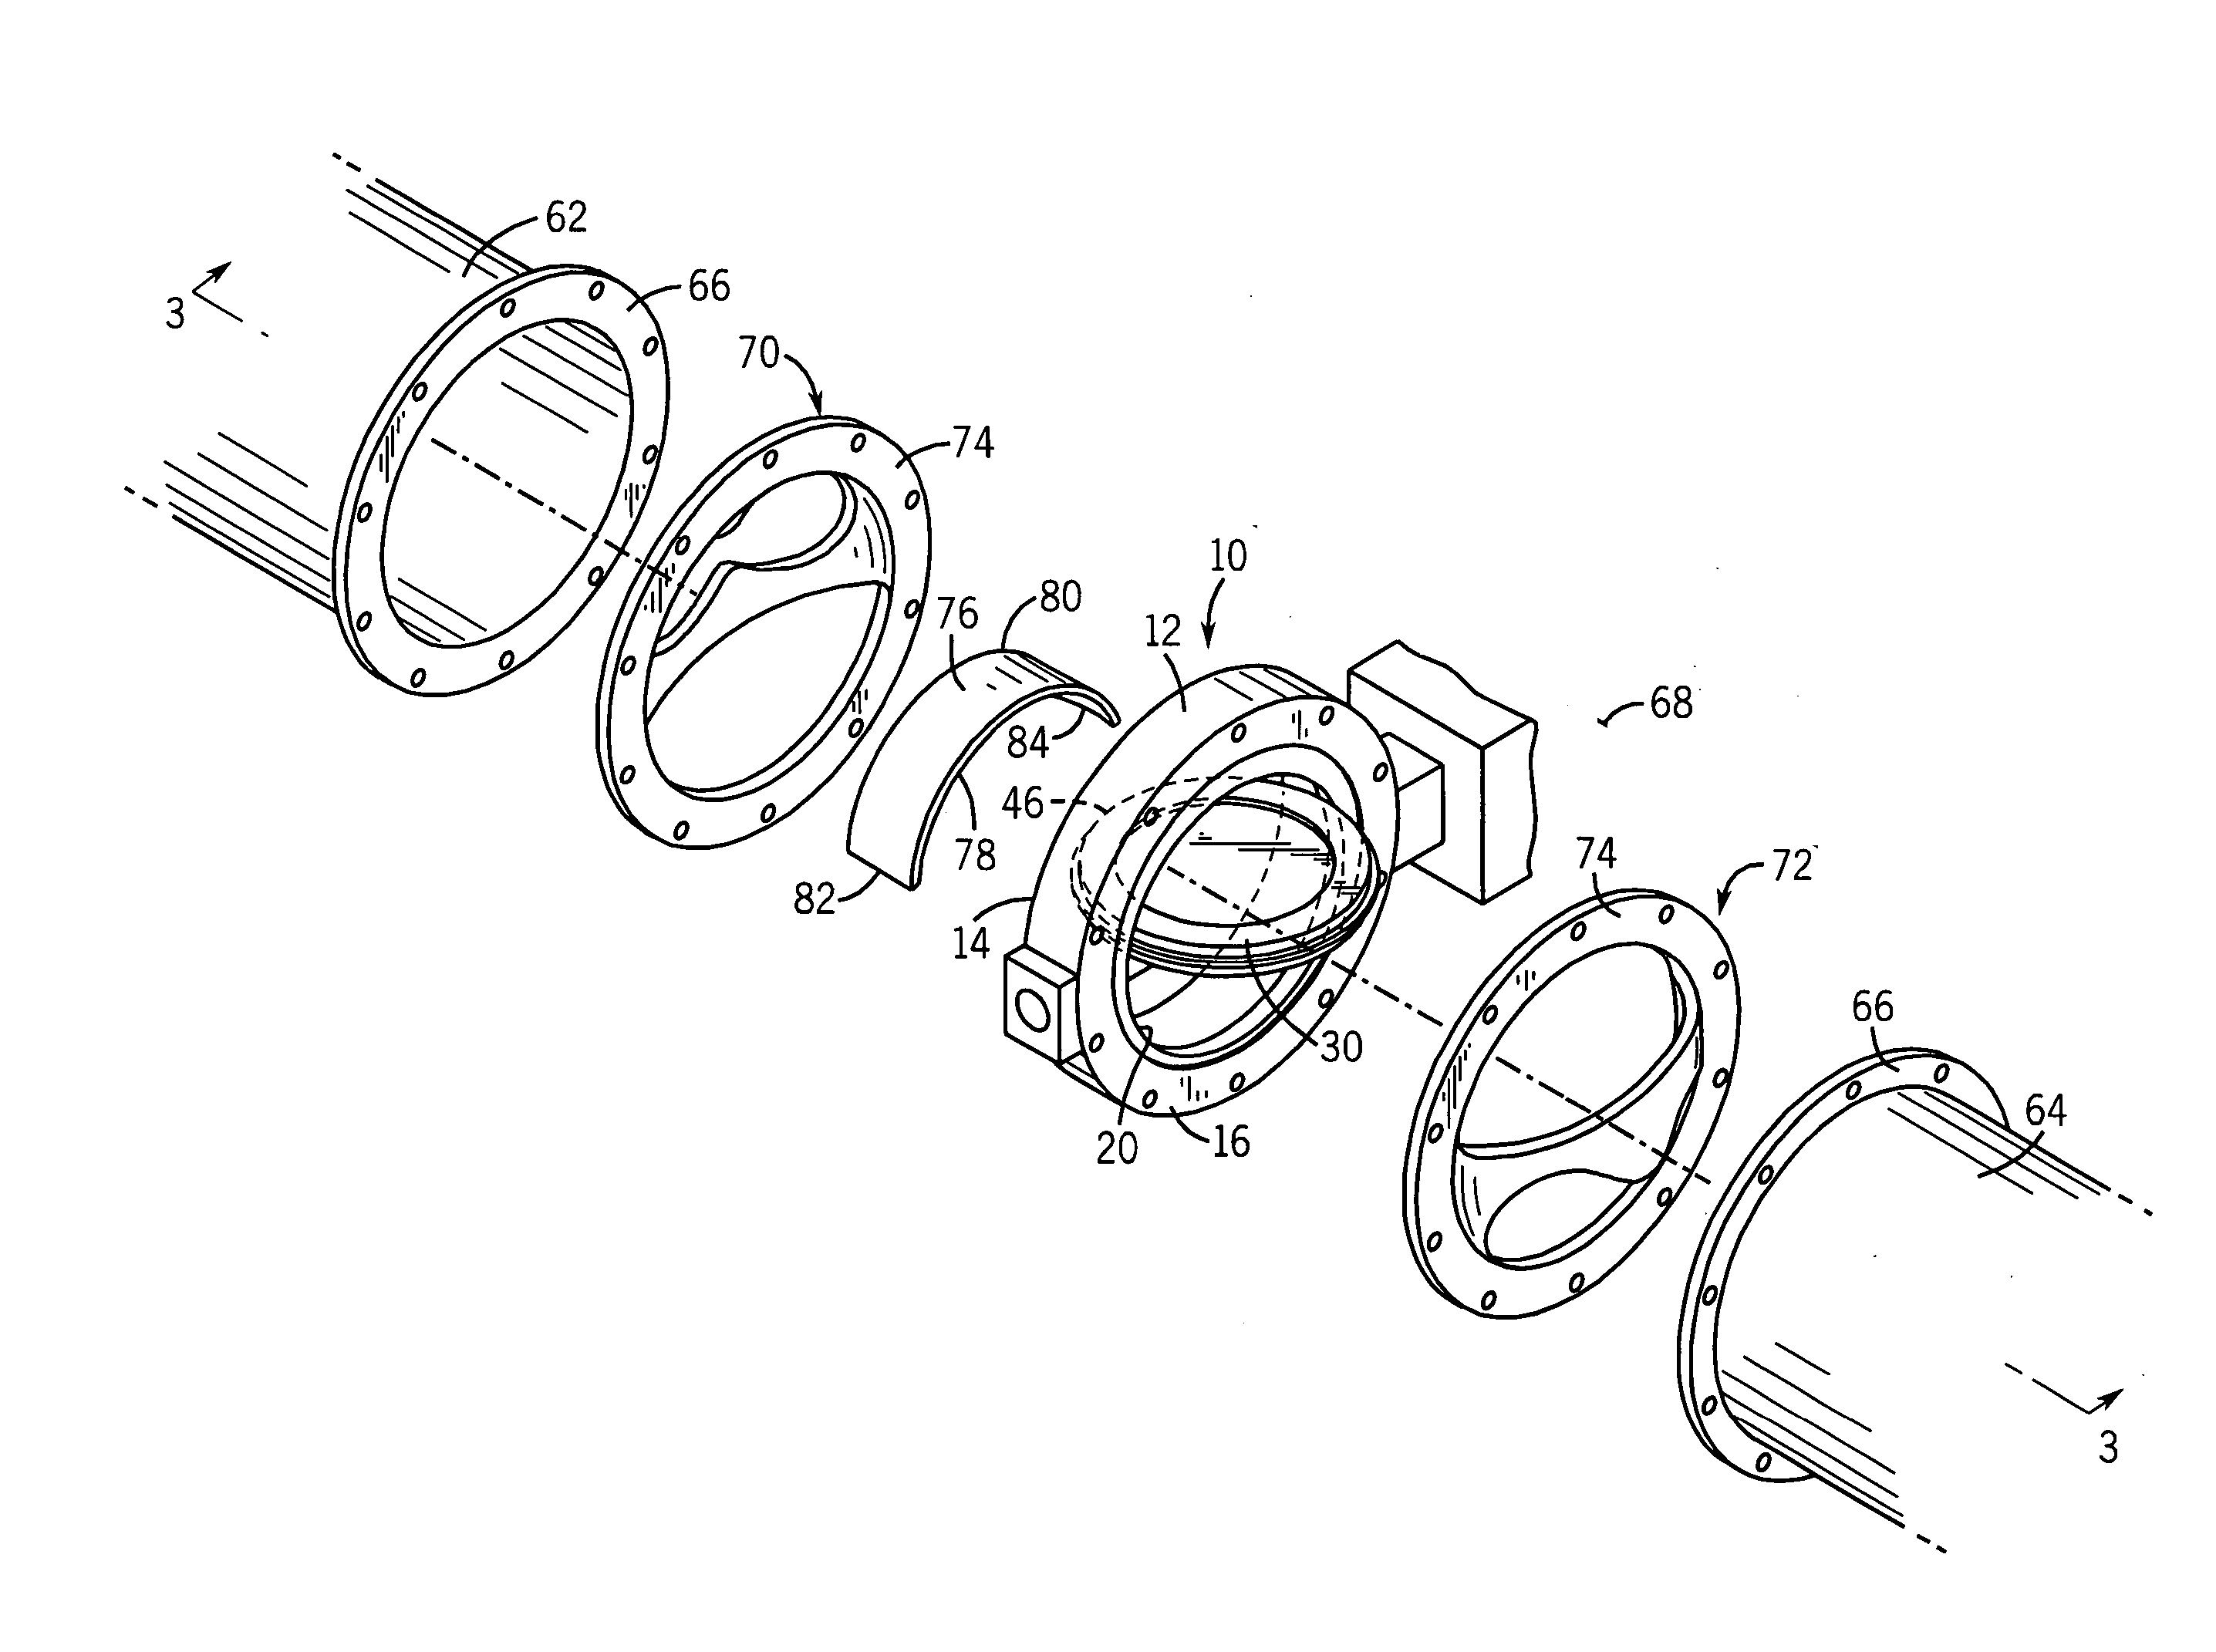 Butterfly valve assembly with improved flow characteristics